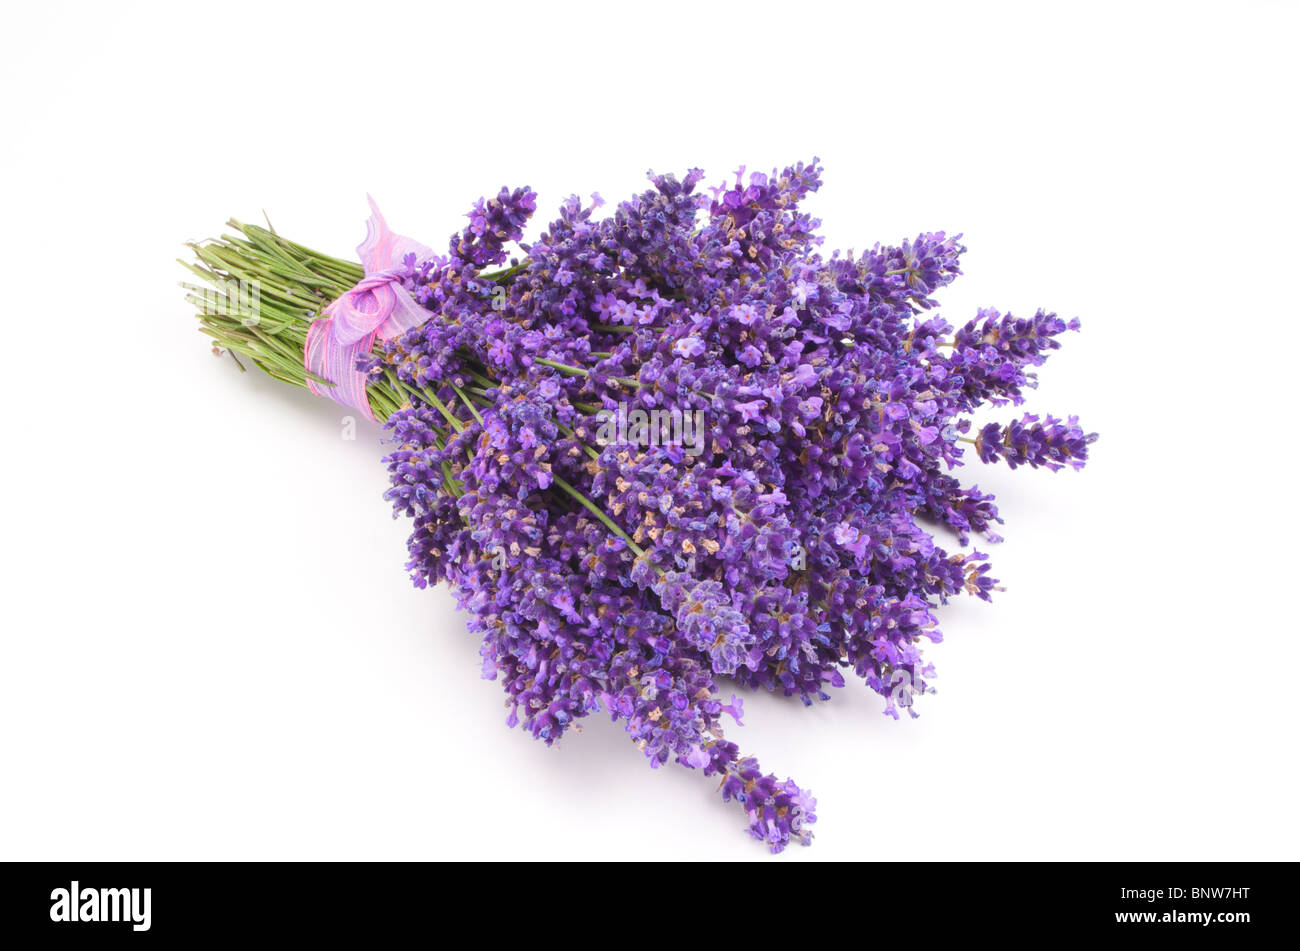 Bunch of lavender Stock Photo